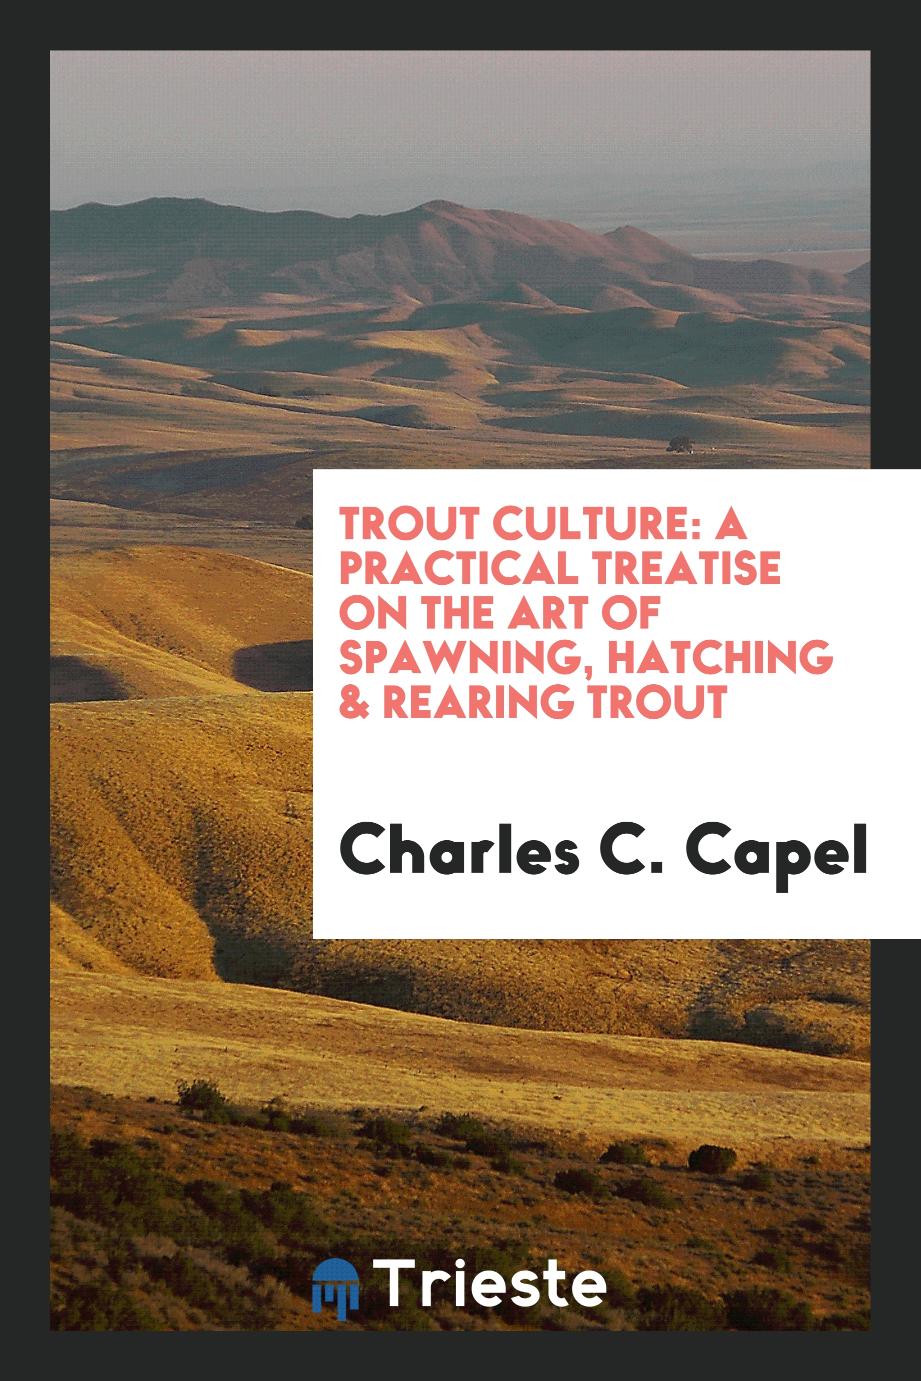 Trout Culture: A Practical Treatise on the Art of Spawning, Hatching & Rearing Trout